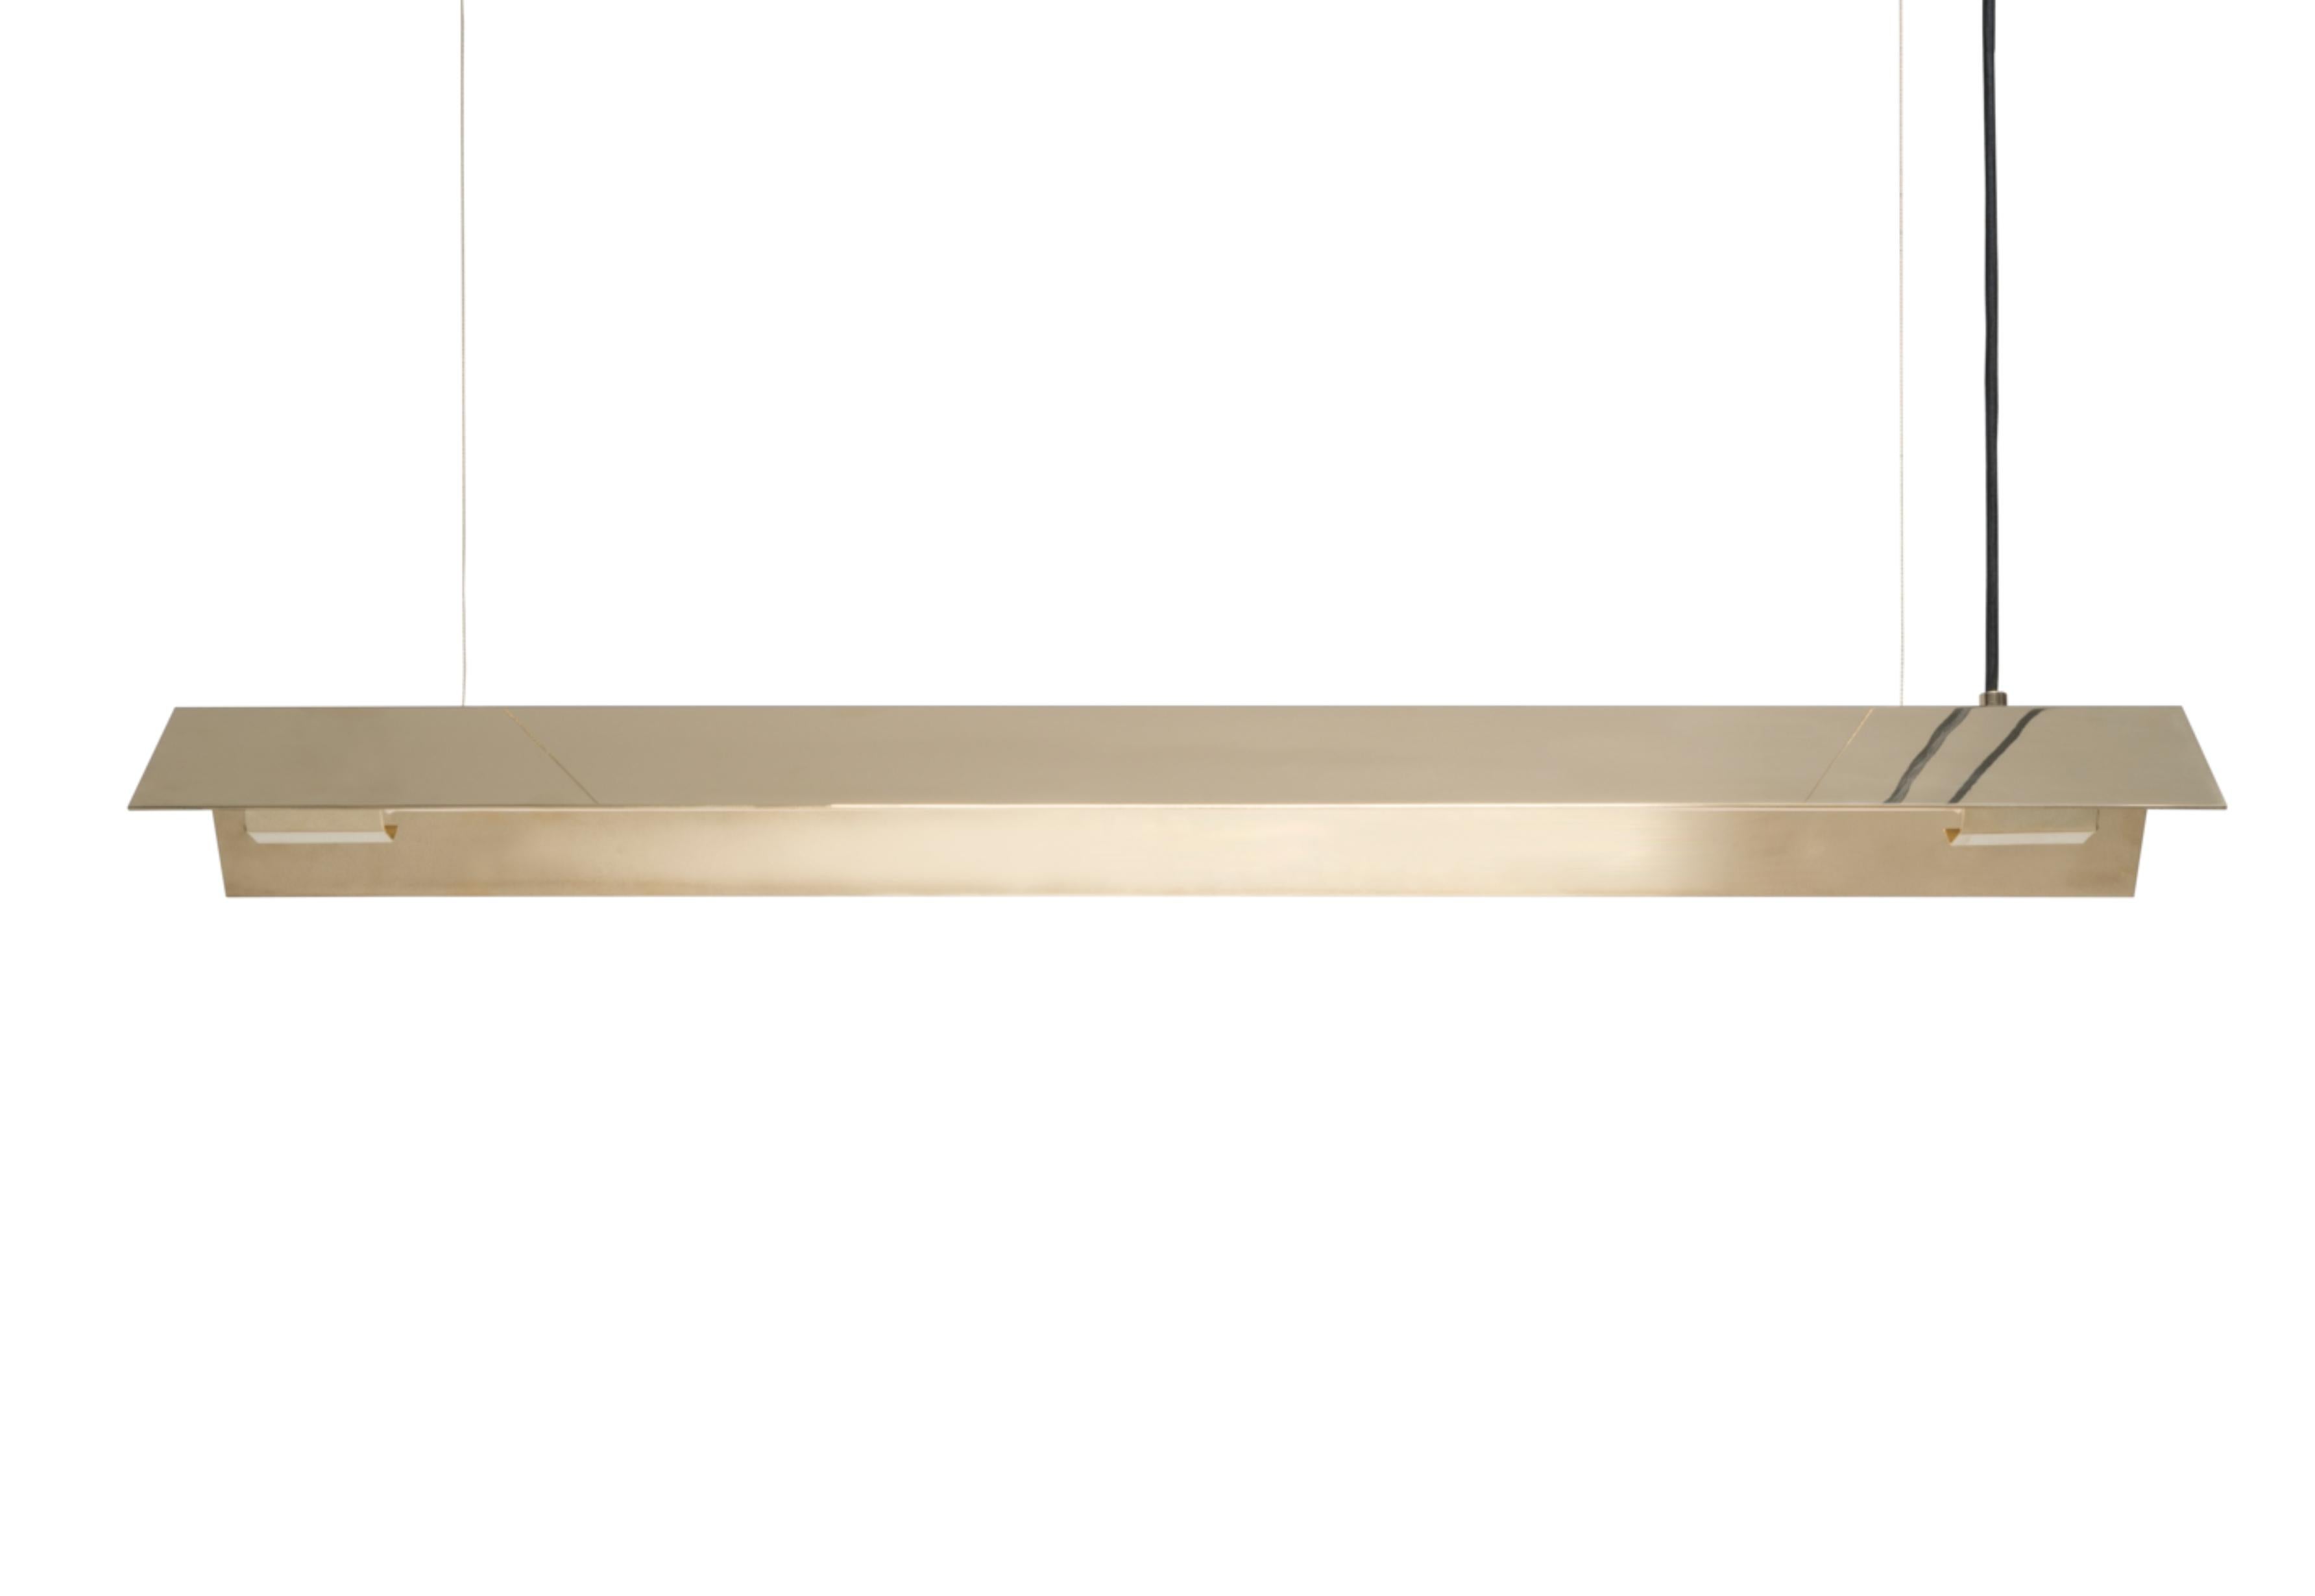 Small Misalliance solid brass suspended light by Lexavala.
Dimensions: D 16 x W 70 x H 8 cm
Materials: Brass.

There are two lenghts of socket covers, extending over the LED. Two short are to be found in Suspended and Surface, and one long in